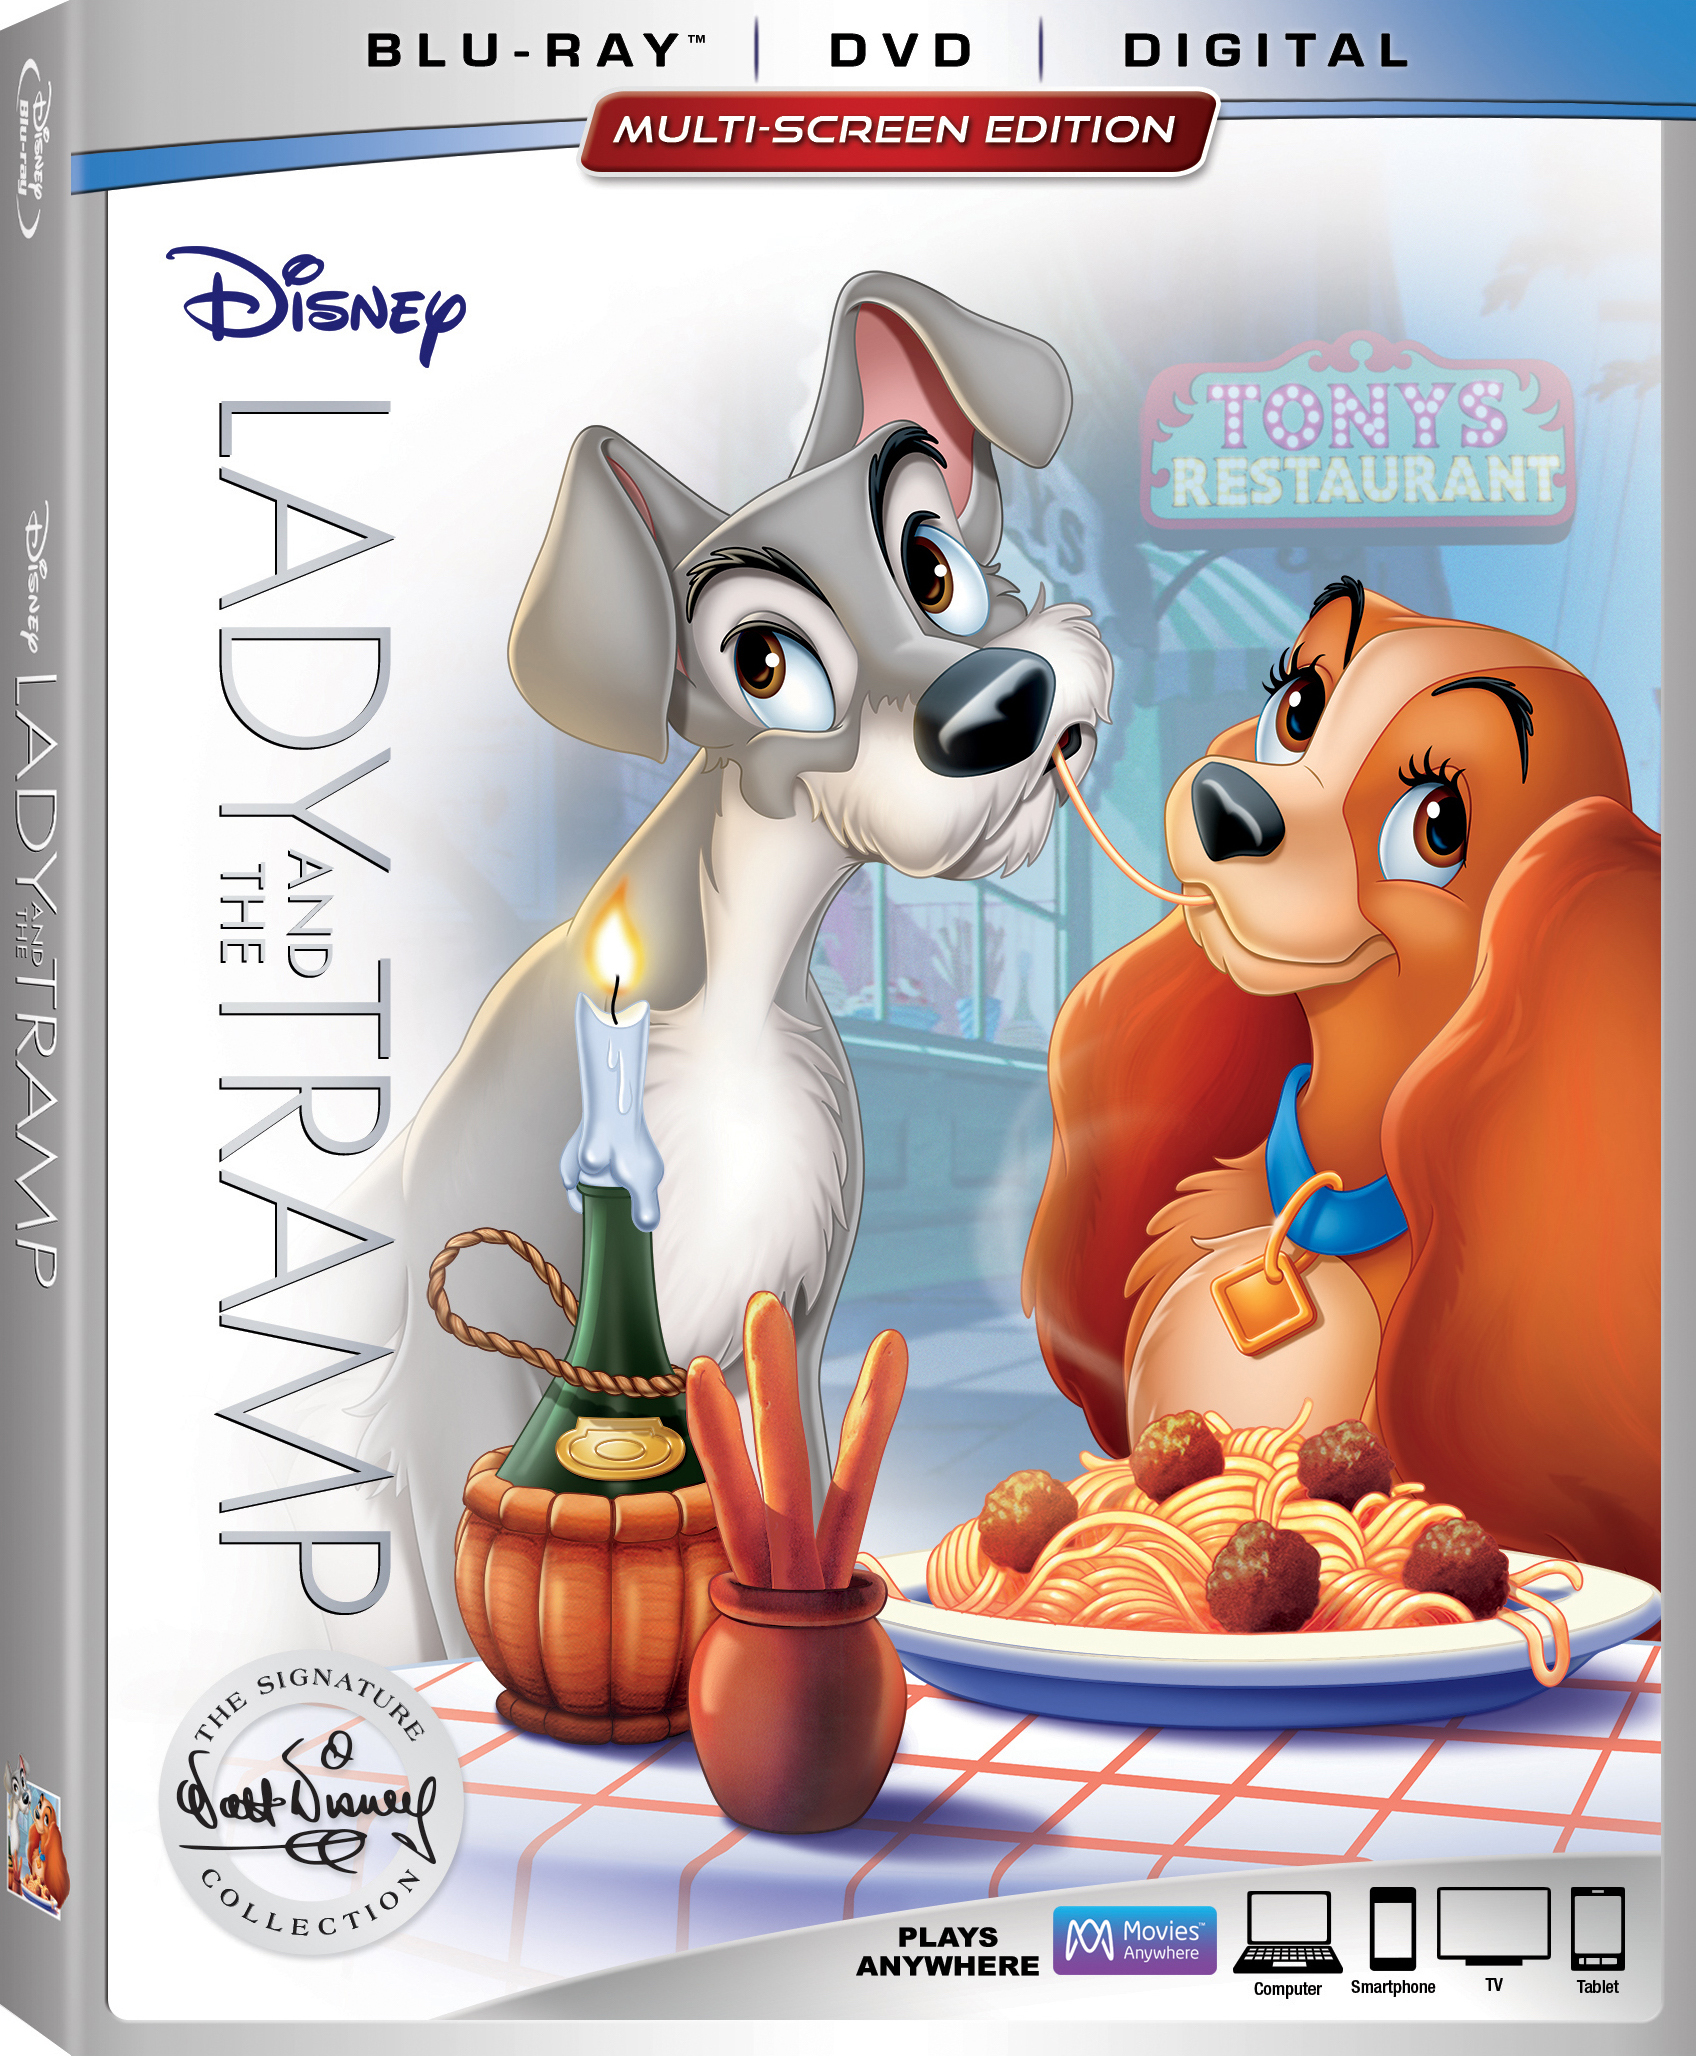 Lady and the Tramp is Released - D23